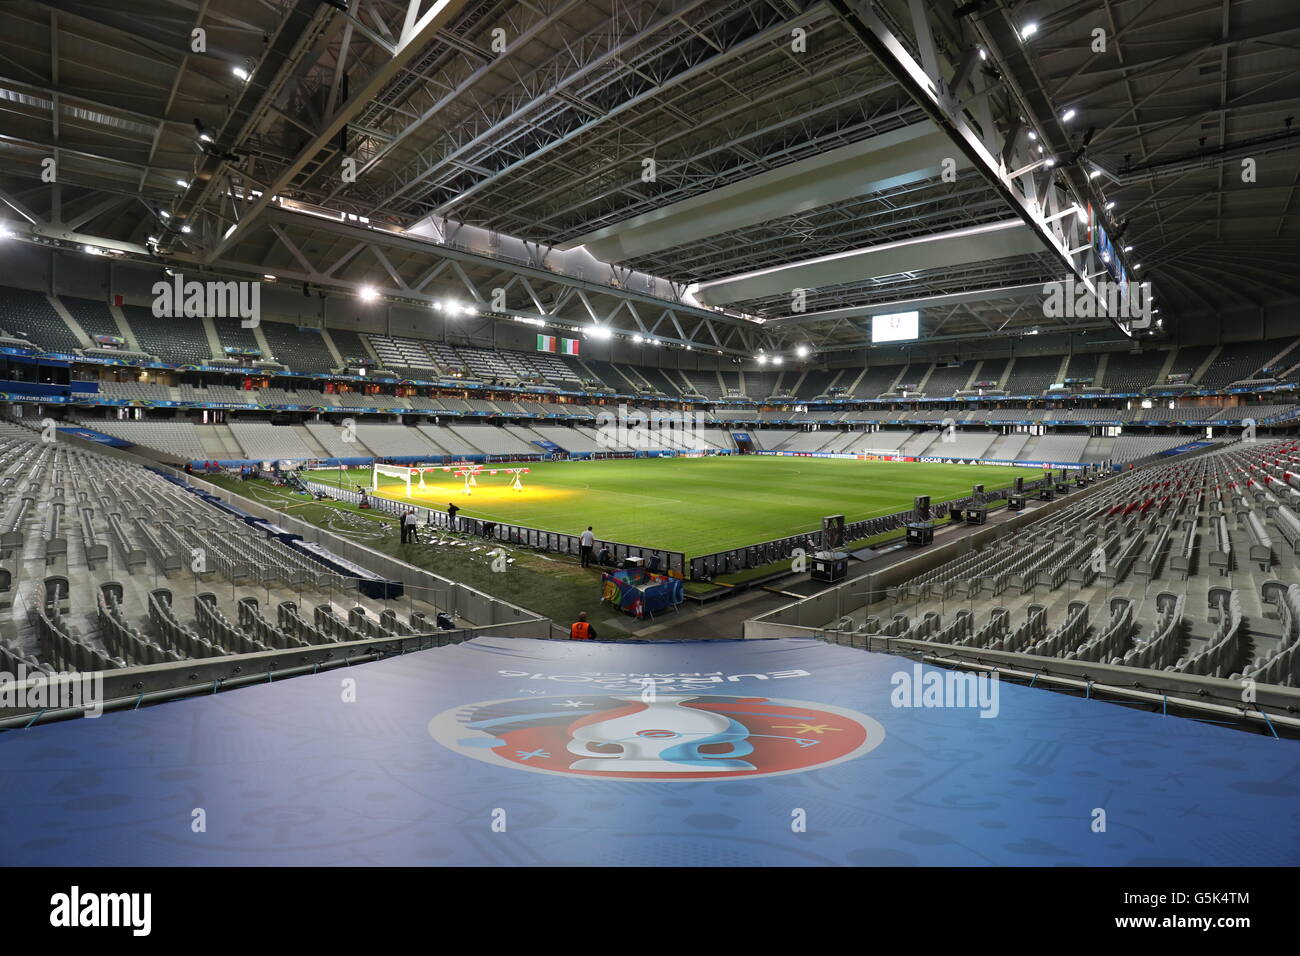 General view of the Stade Pierre-Mauroy, Lille. Stock Photo